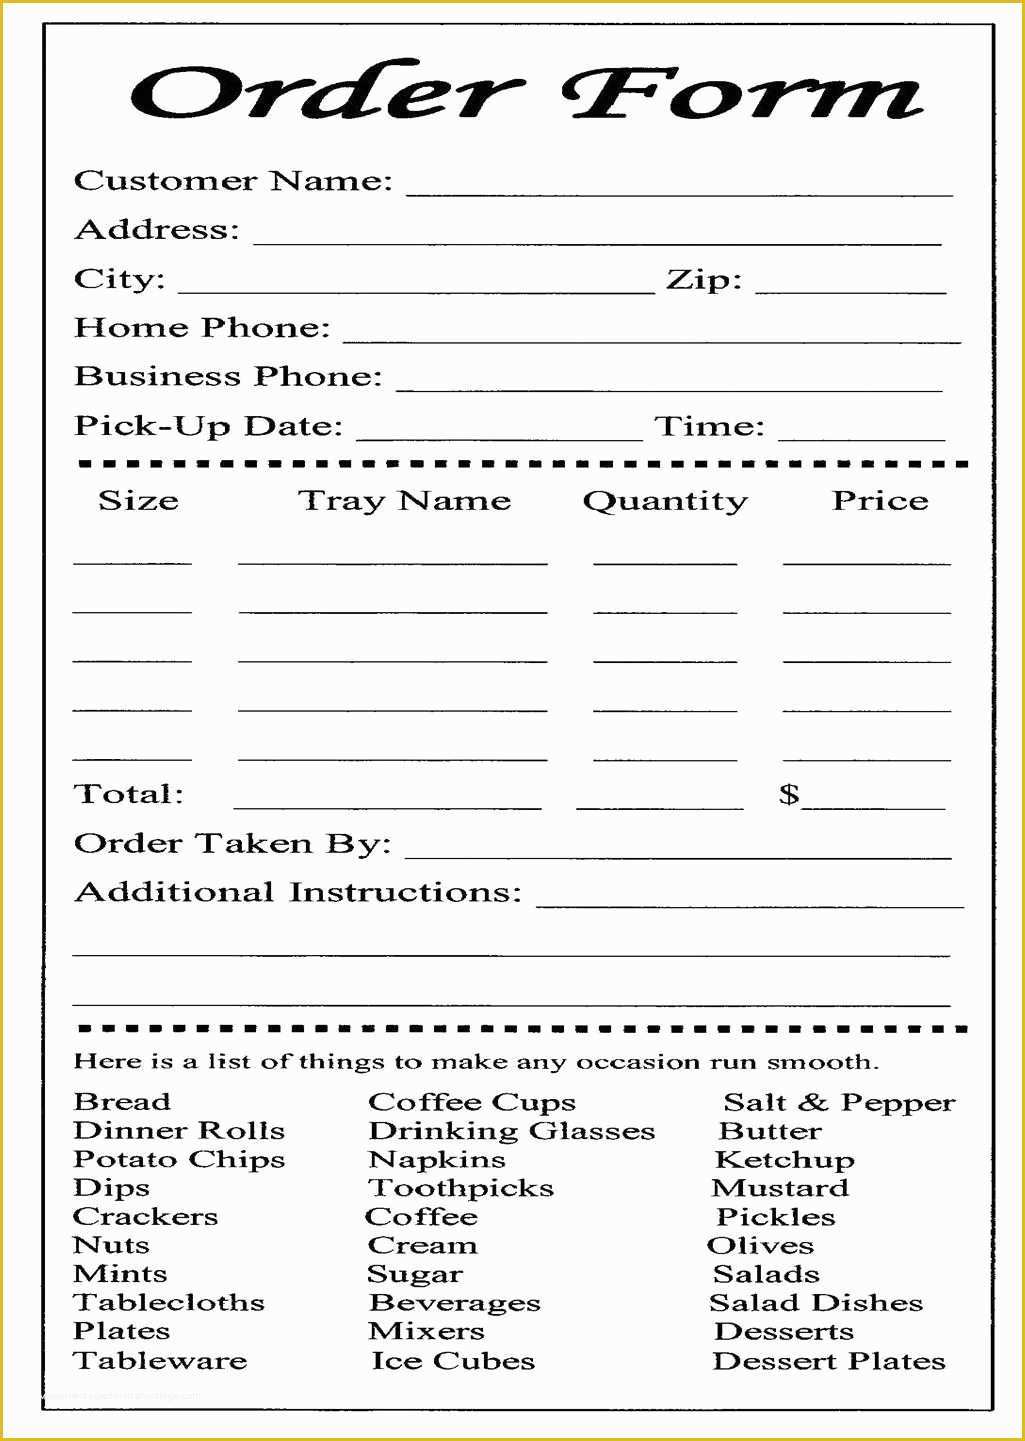 Picture order form Template Free Of Catering Menu Samples On Pinterest